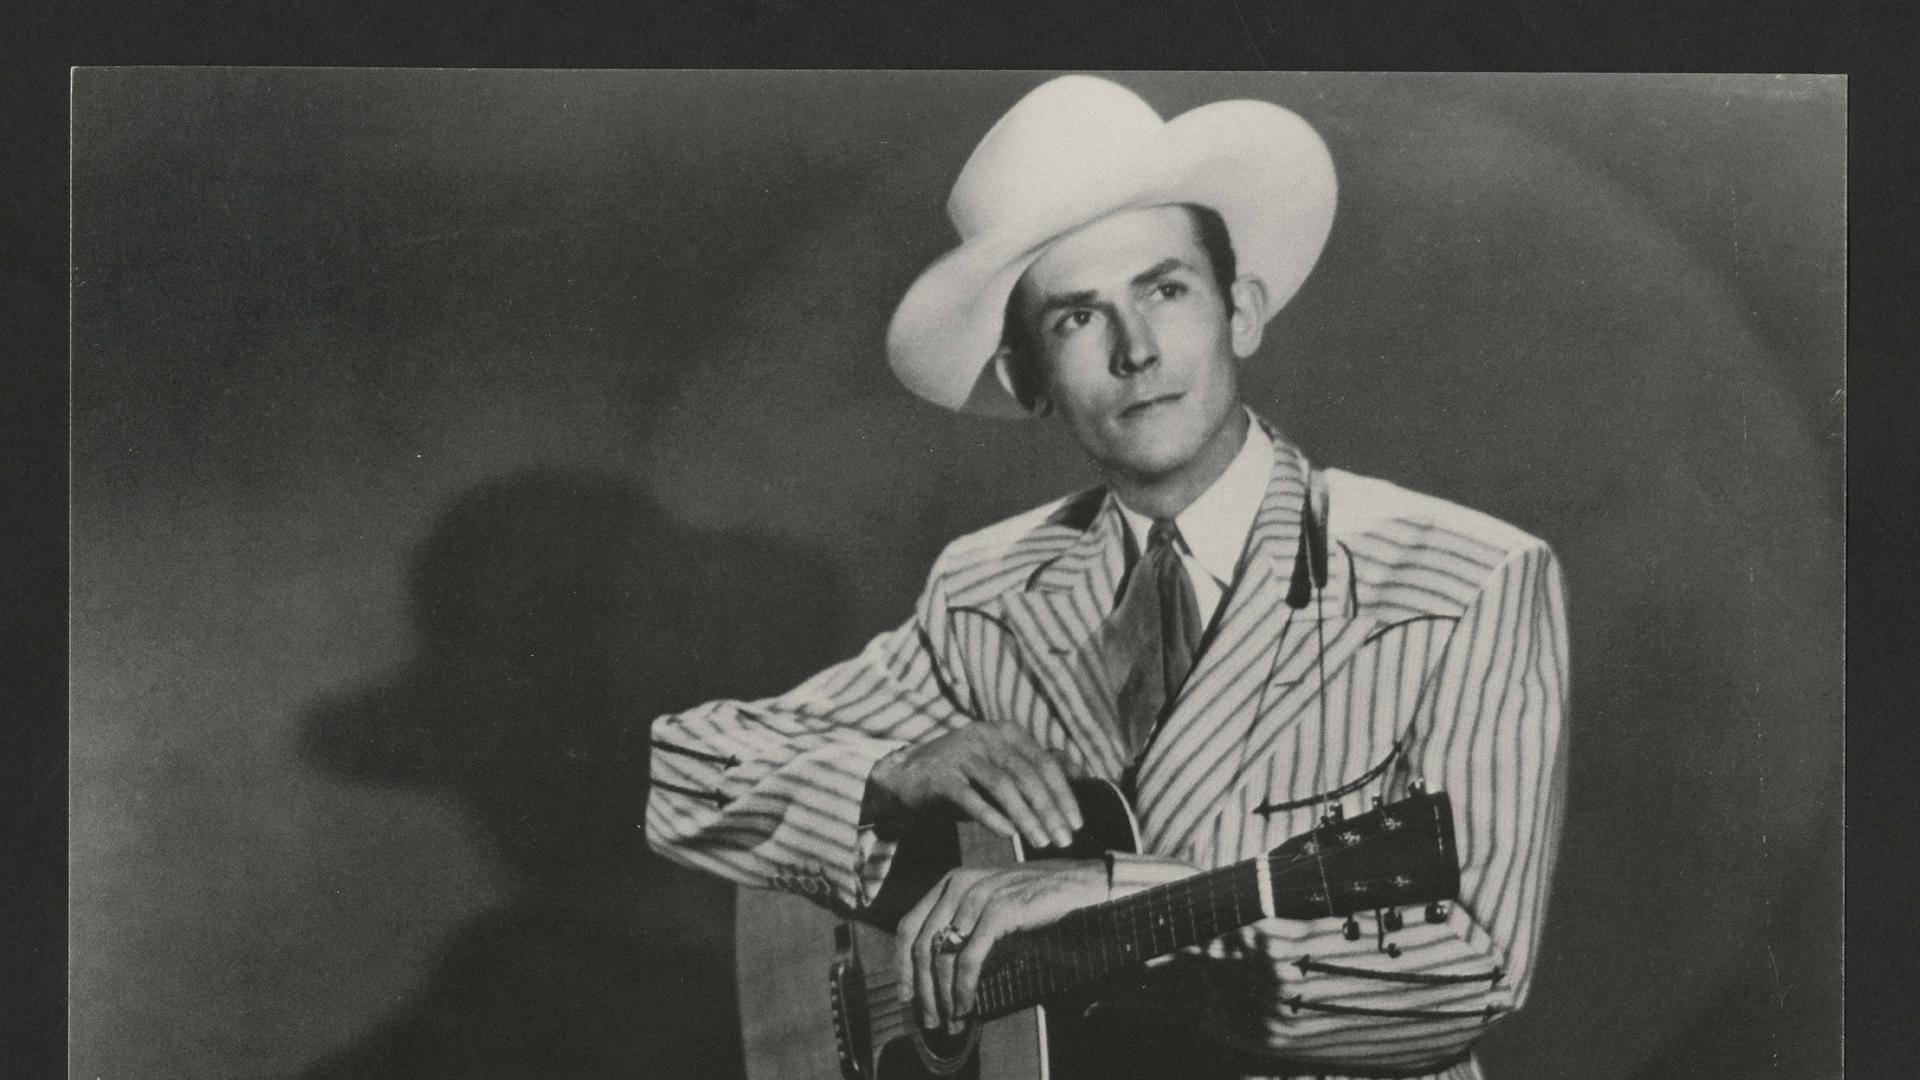 Caption: Hank Williams at the Rock and Roll Hall Of Fame Wallpaper